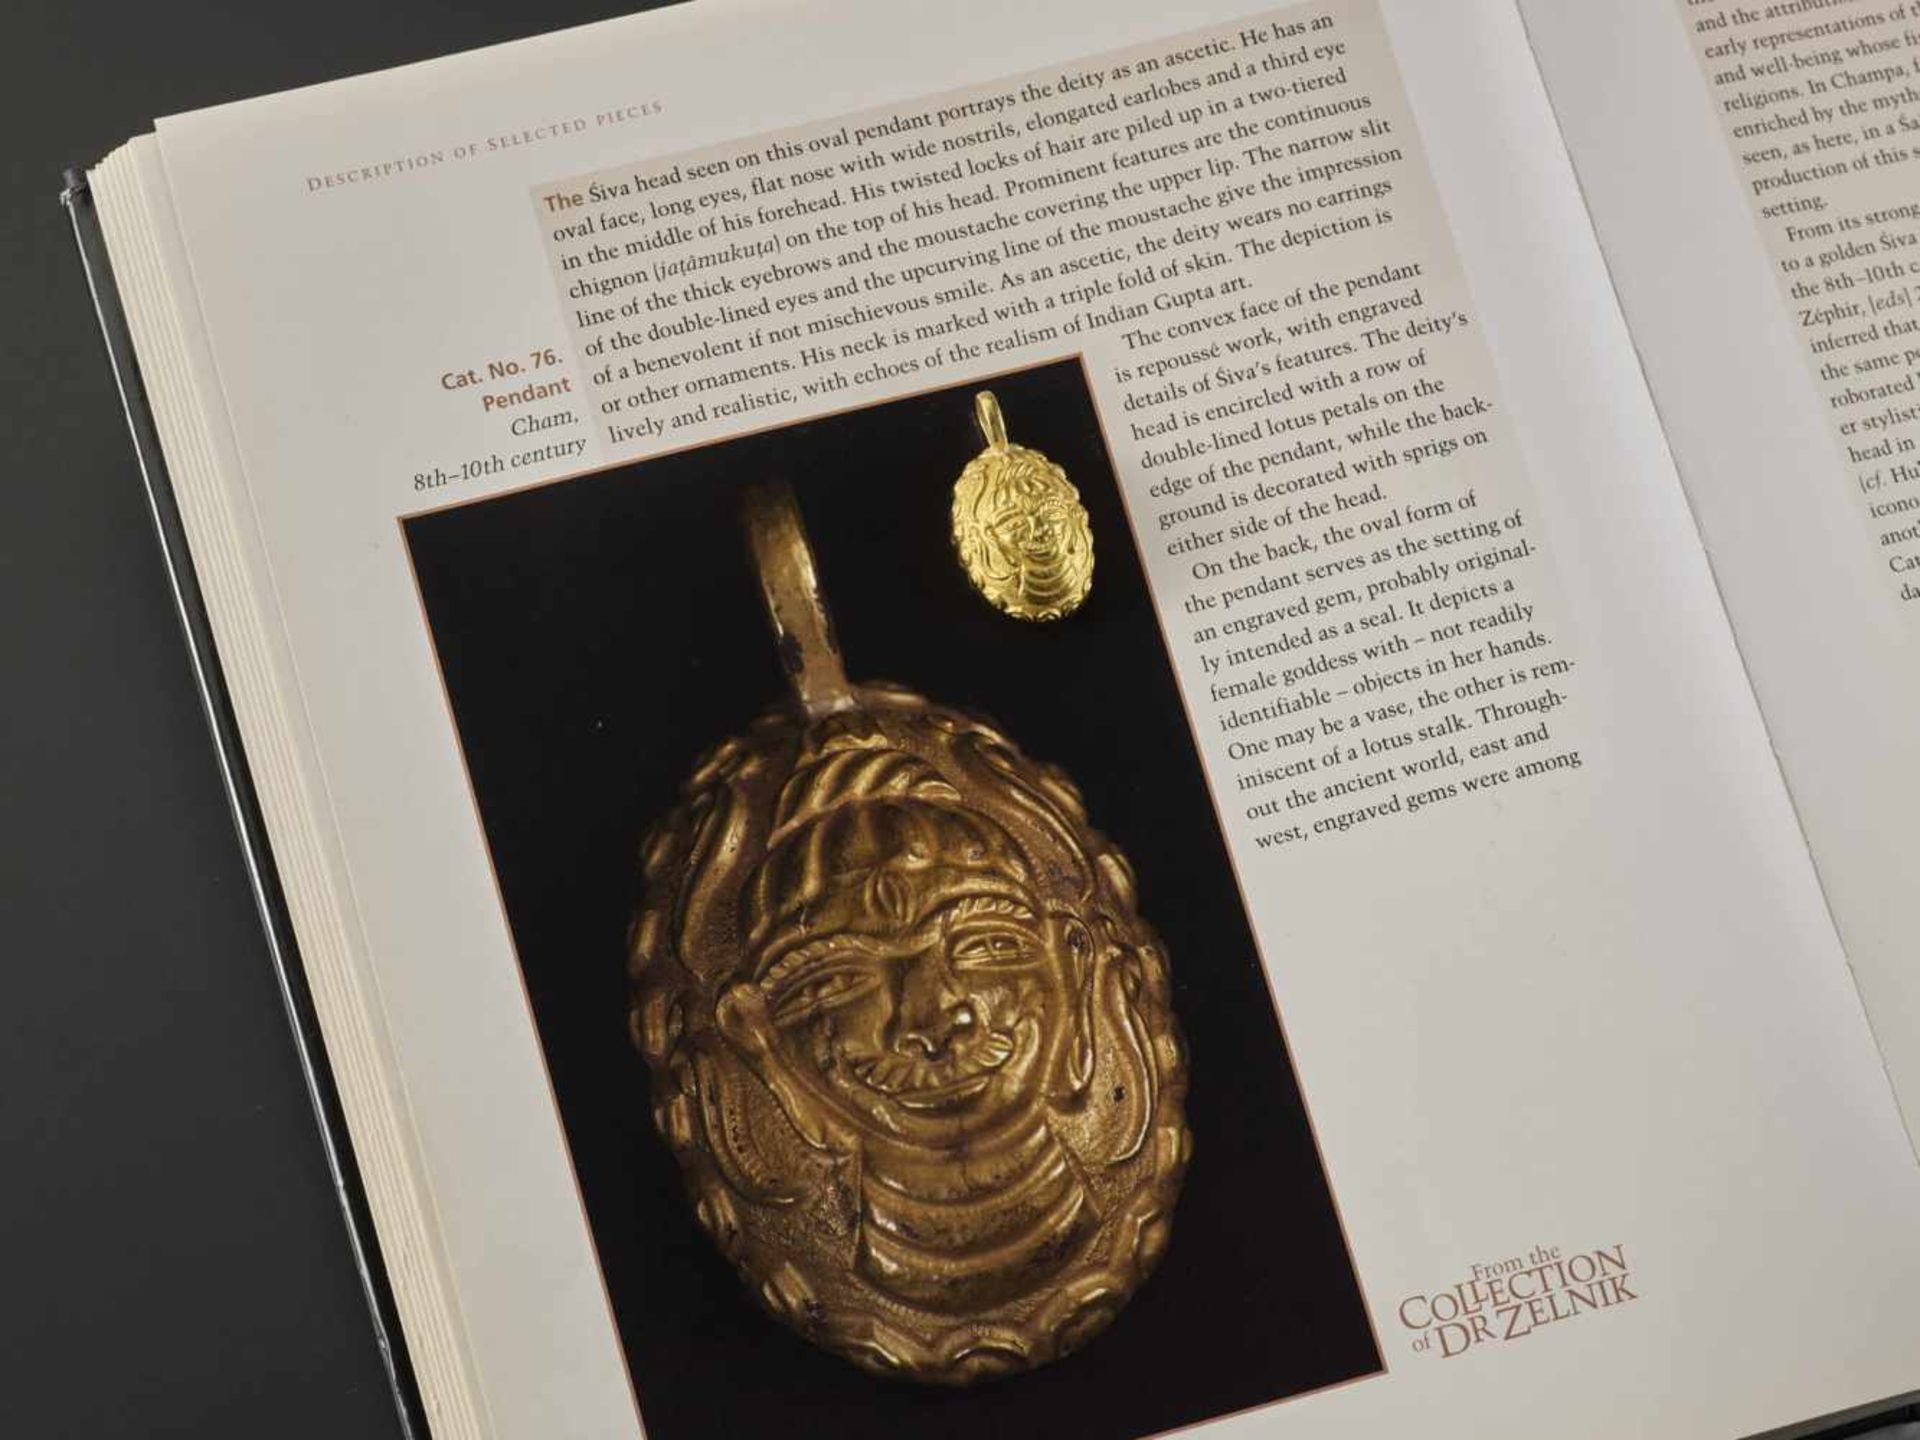 A CHAM GOLD PENDANT WITH STONE INTAGLIO DEPICTING SHIVA AND A HINDU DEITY Champa, early classical - Image 2 of 6